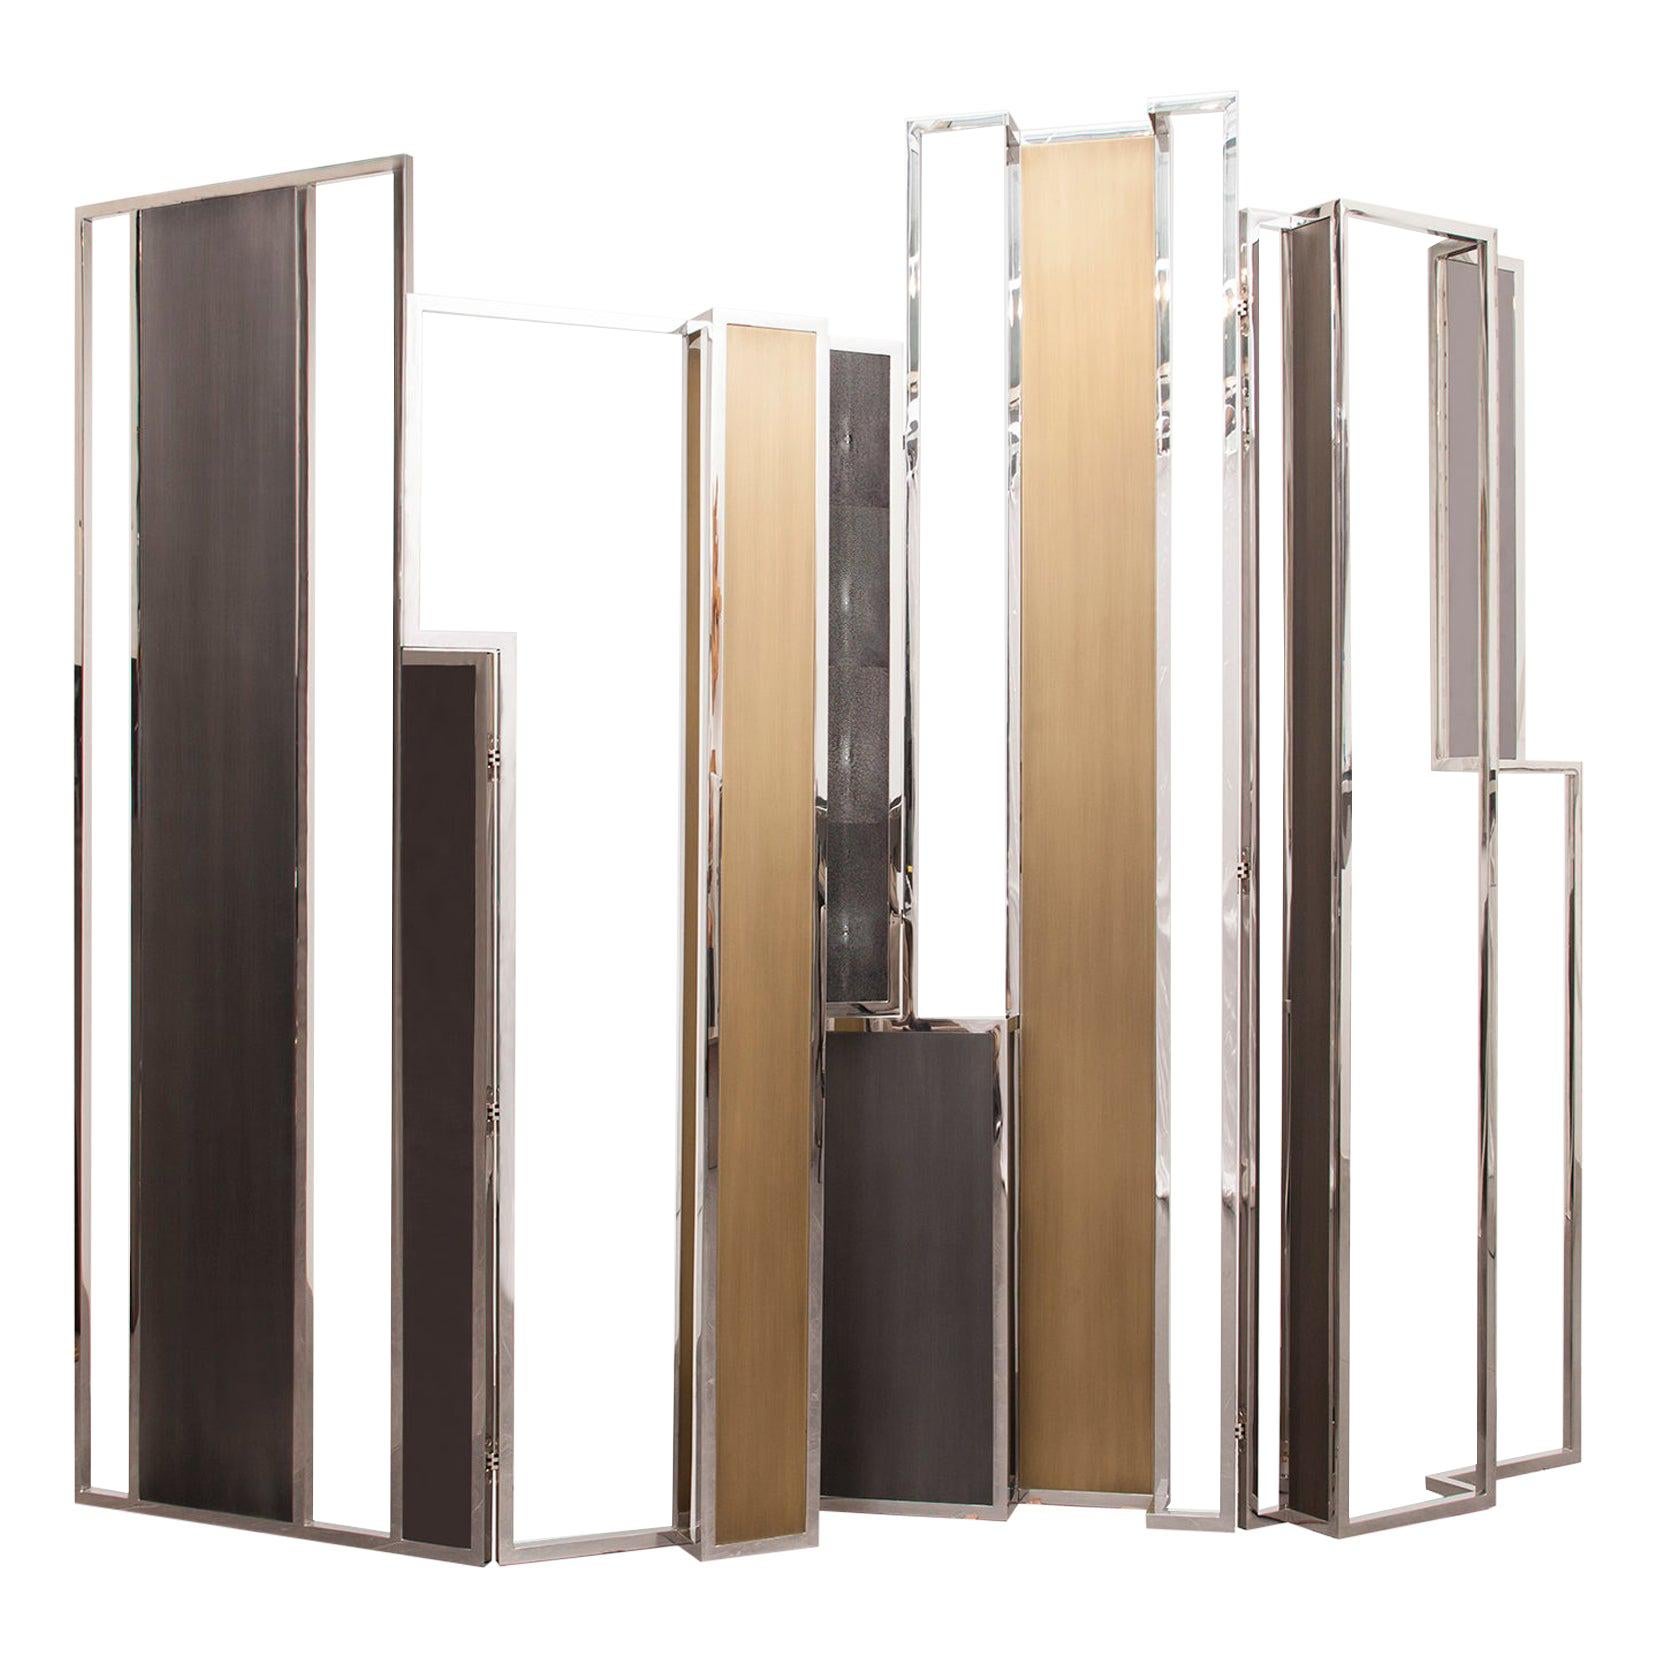 Skyline, Room Divider in Stingray Leather, Stainless Steel, Brass and Lacquer